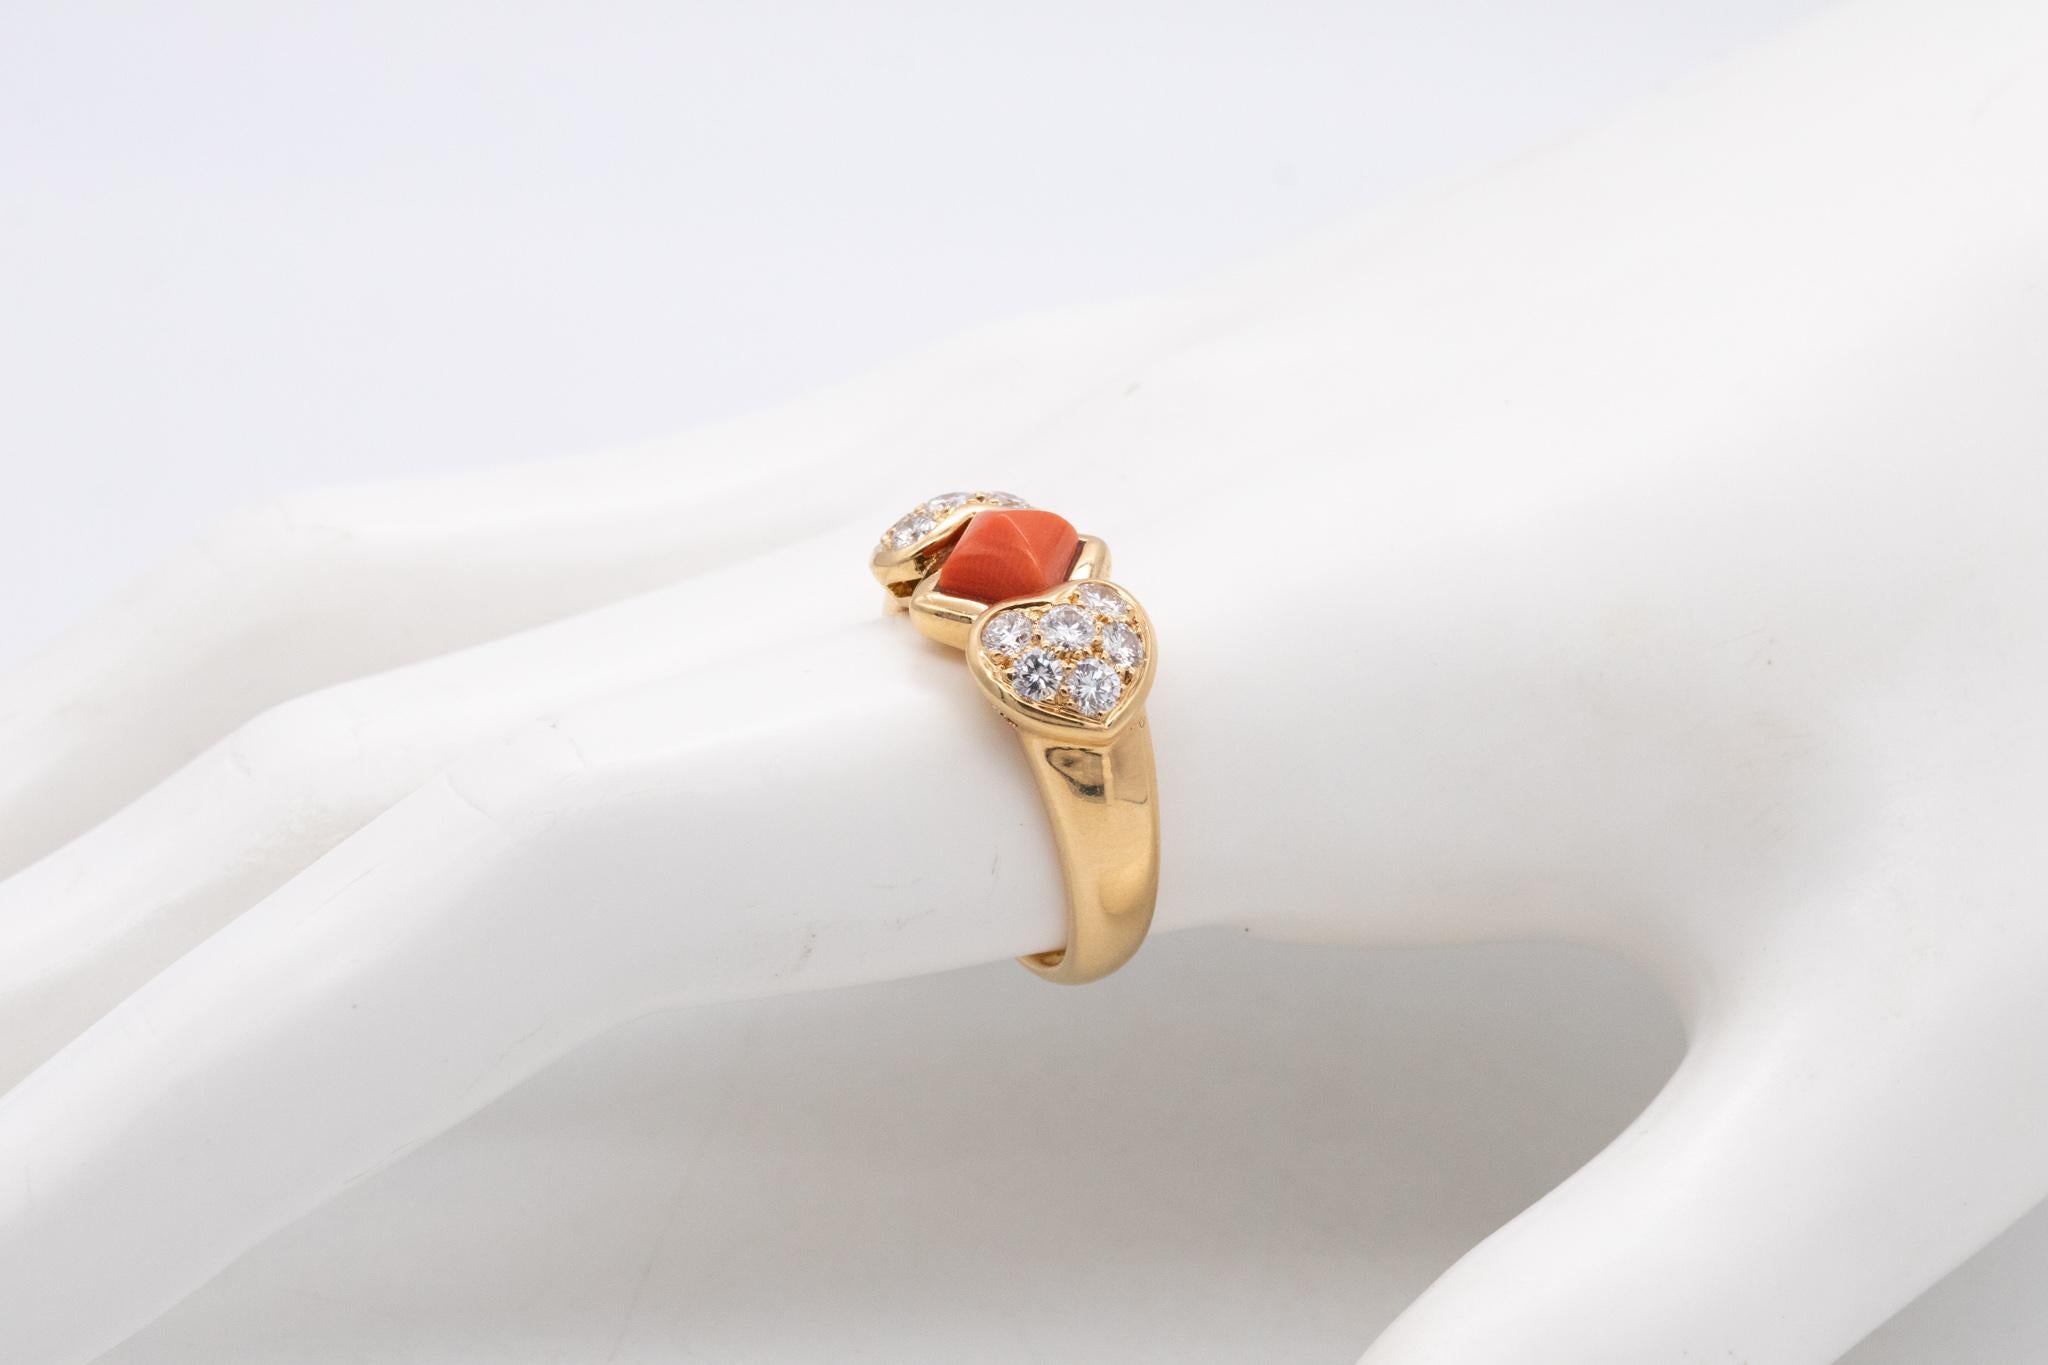 Modernist Christian Dior 1970 Paris Ring 18 Karats Gold with 1.96 Ctw Diamonds and Coral For Sale